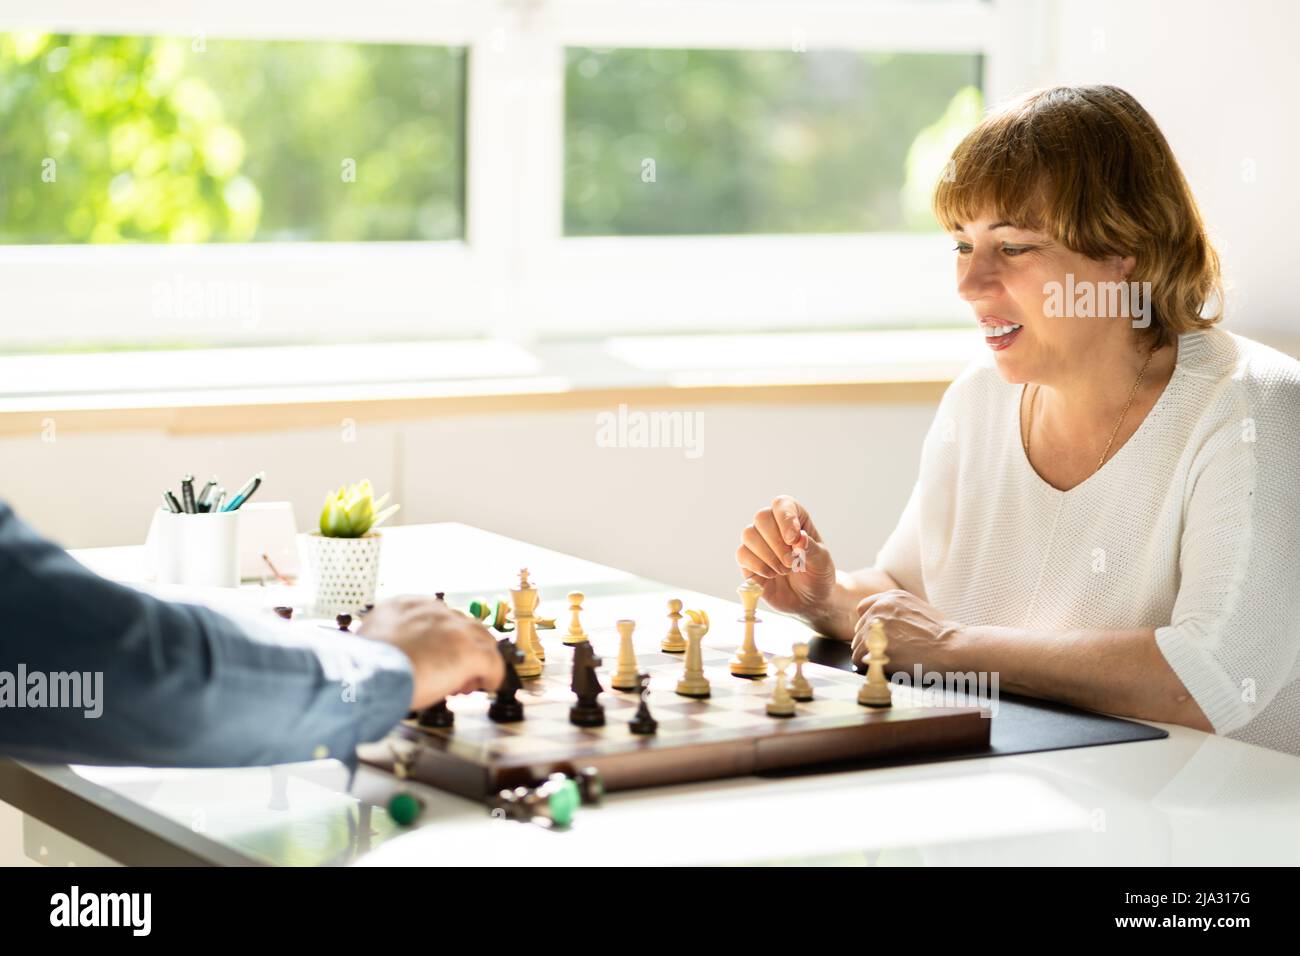 Elderly Senior Playing Chess Table Board Game Stock Photo